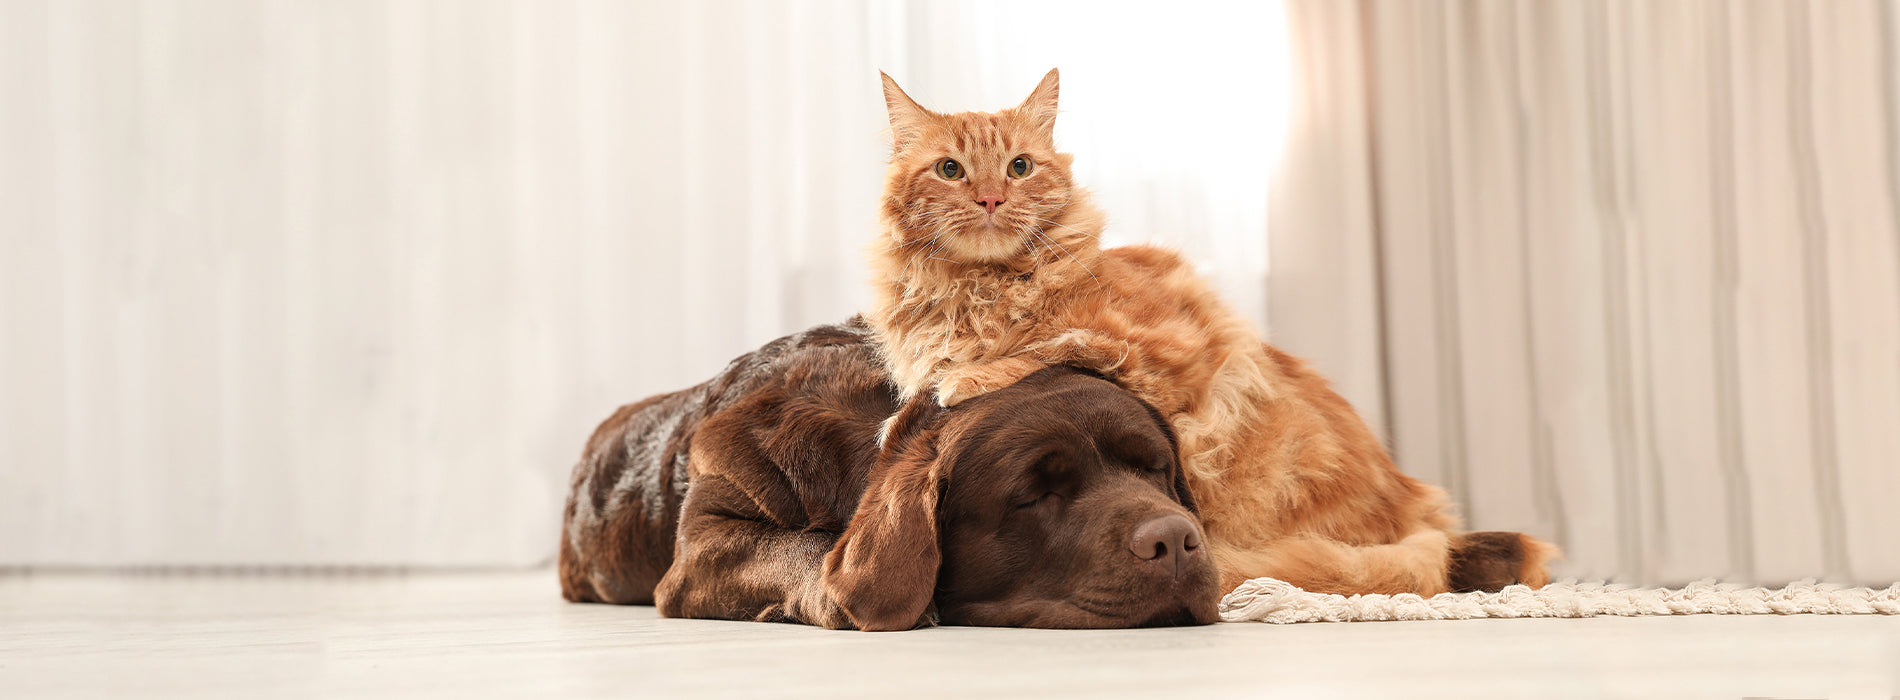 Brilliant Salmon Oil For Dogs And Cats